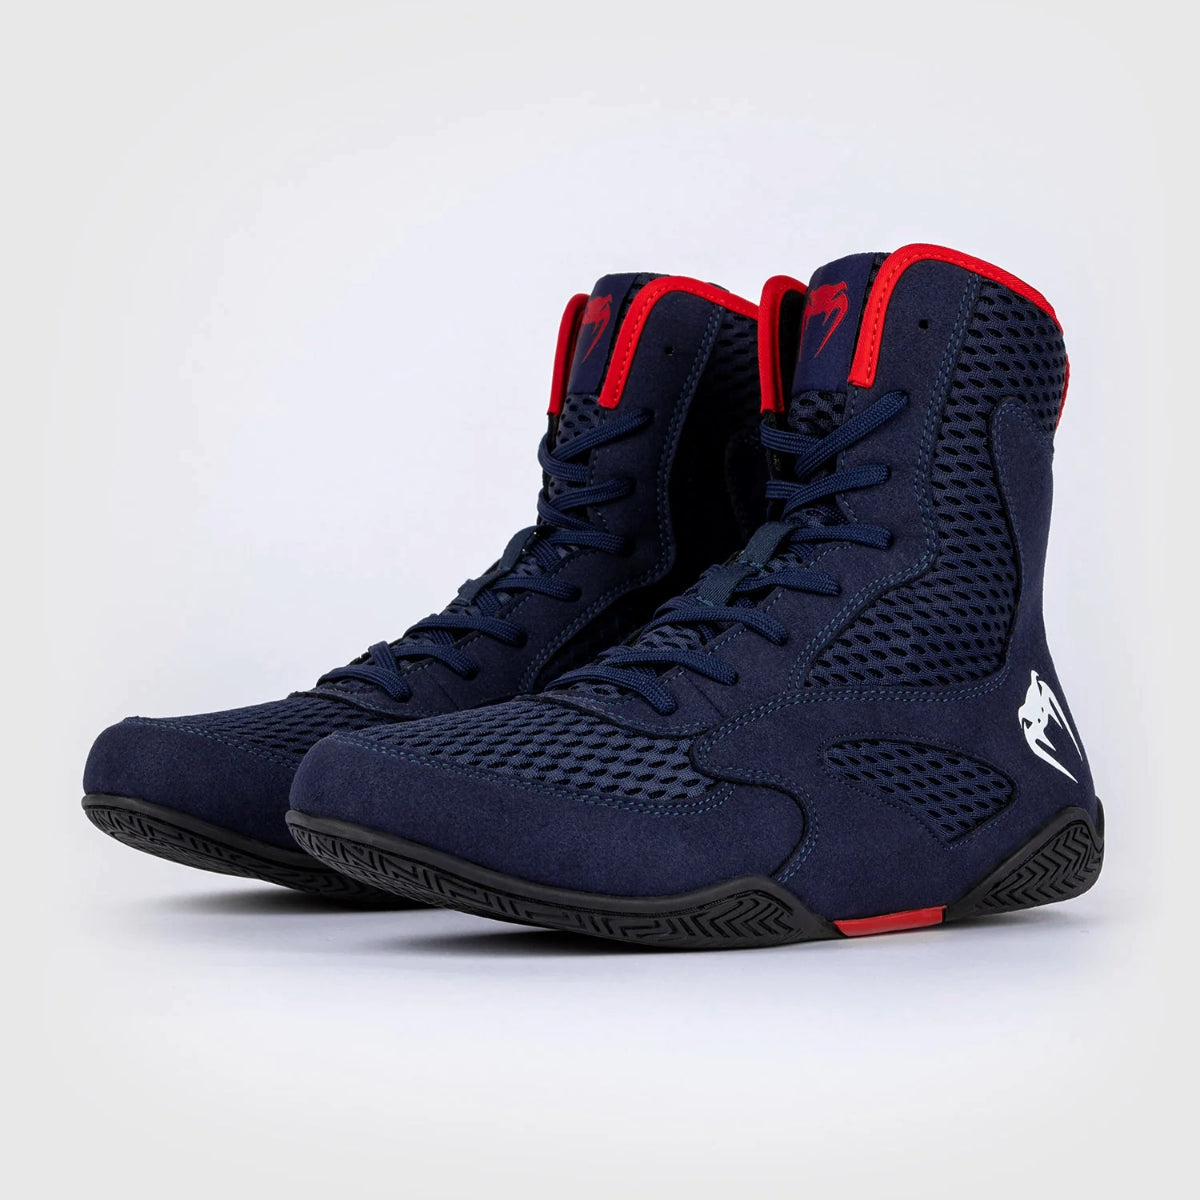 Navy Blue/Red Venum Contender Boxing Shoes - Fight Co